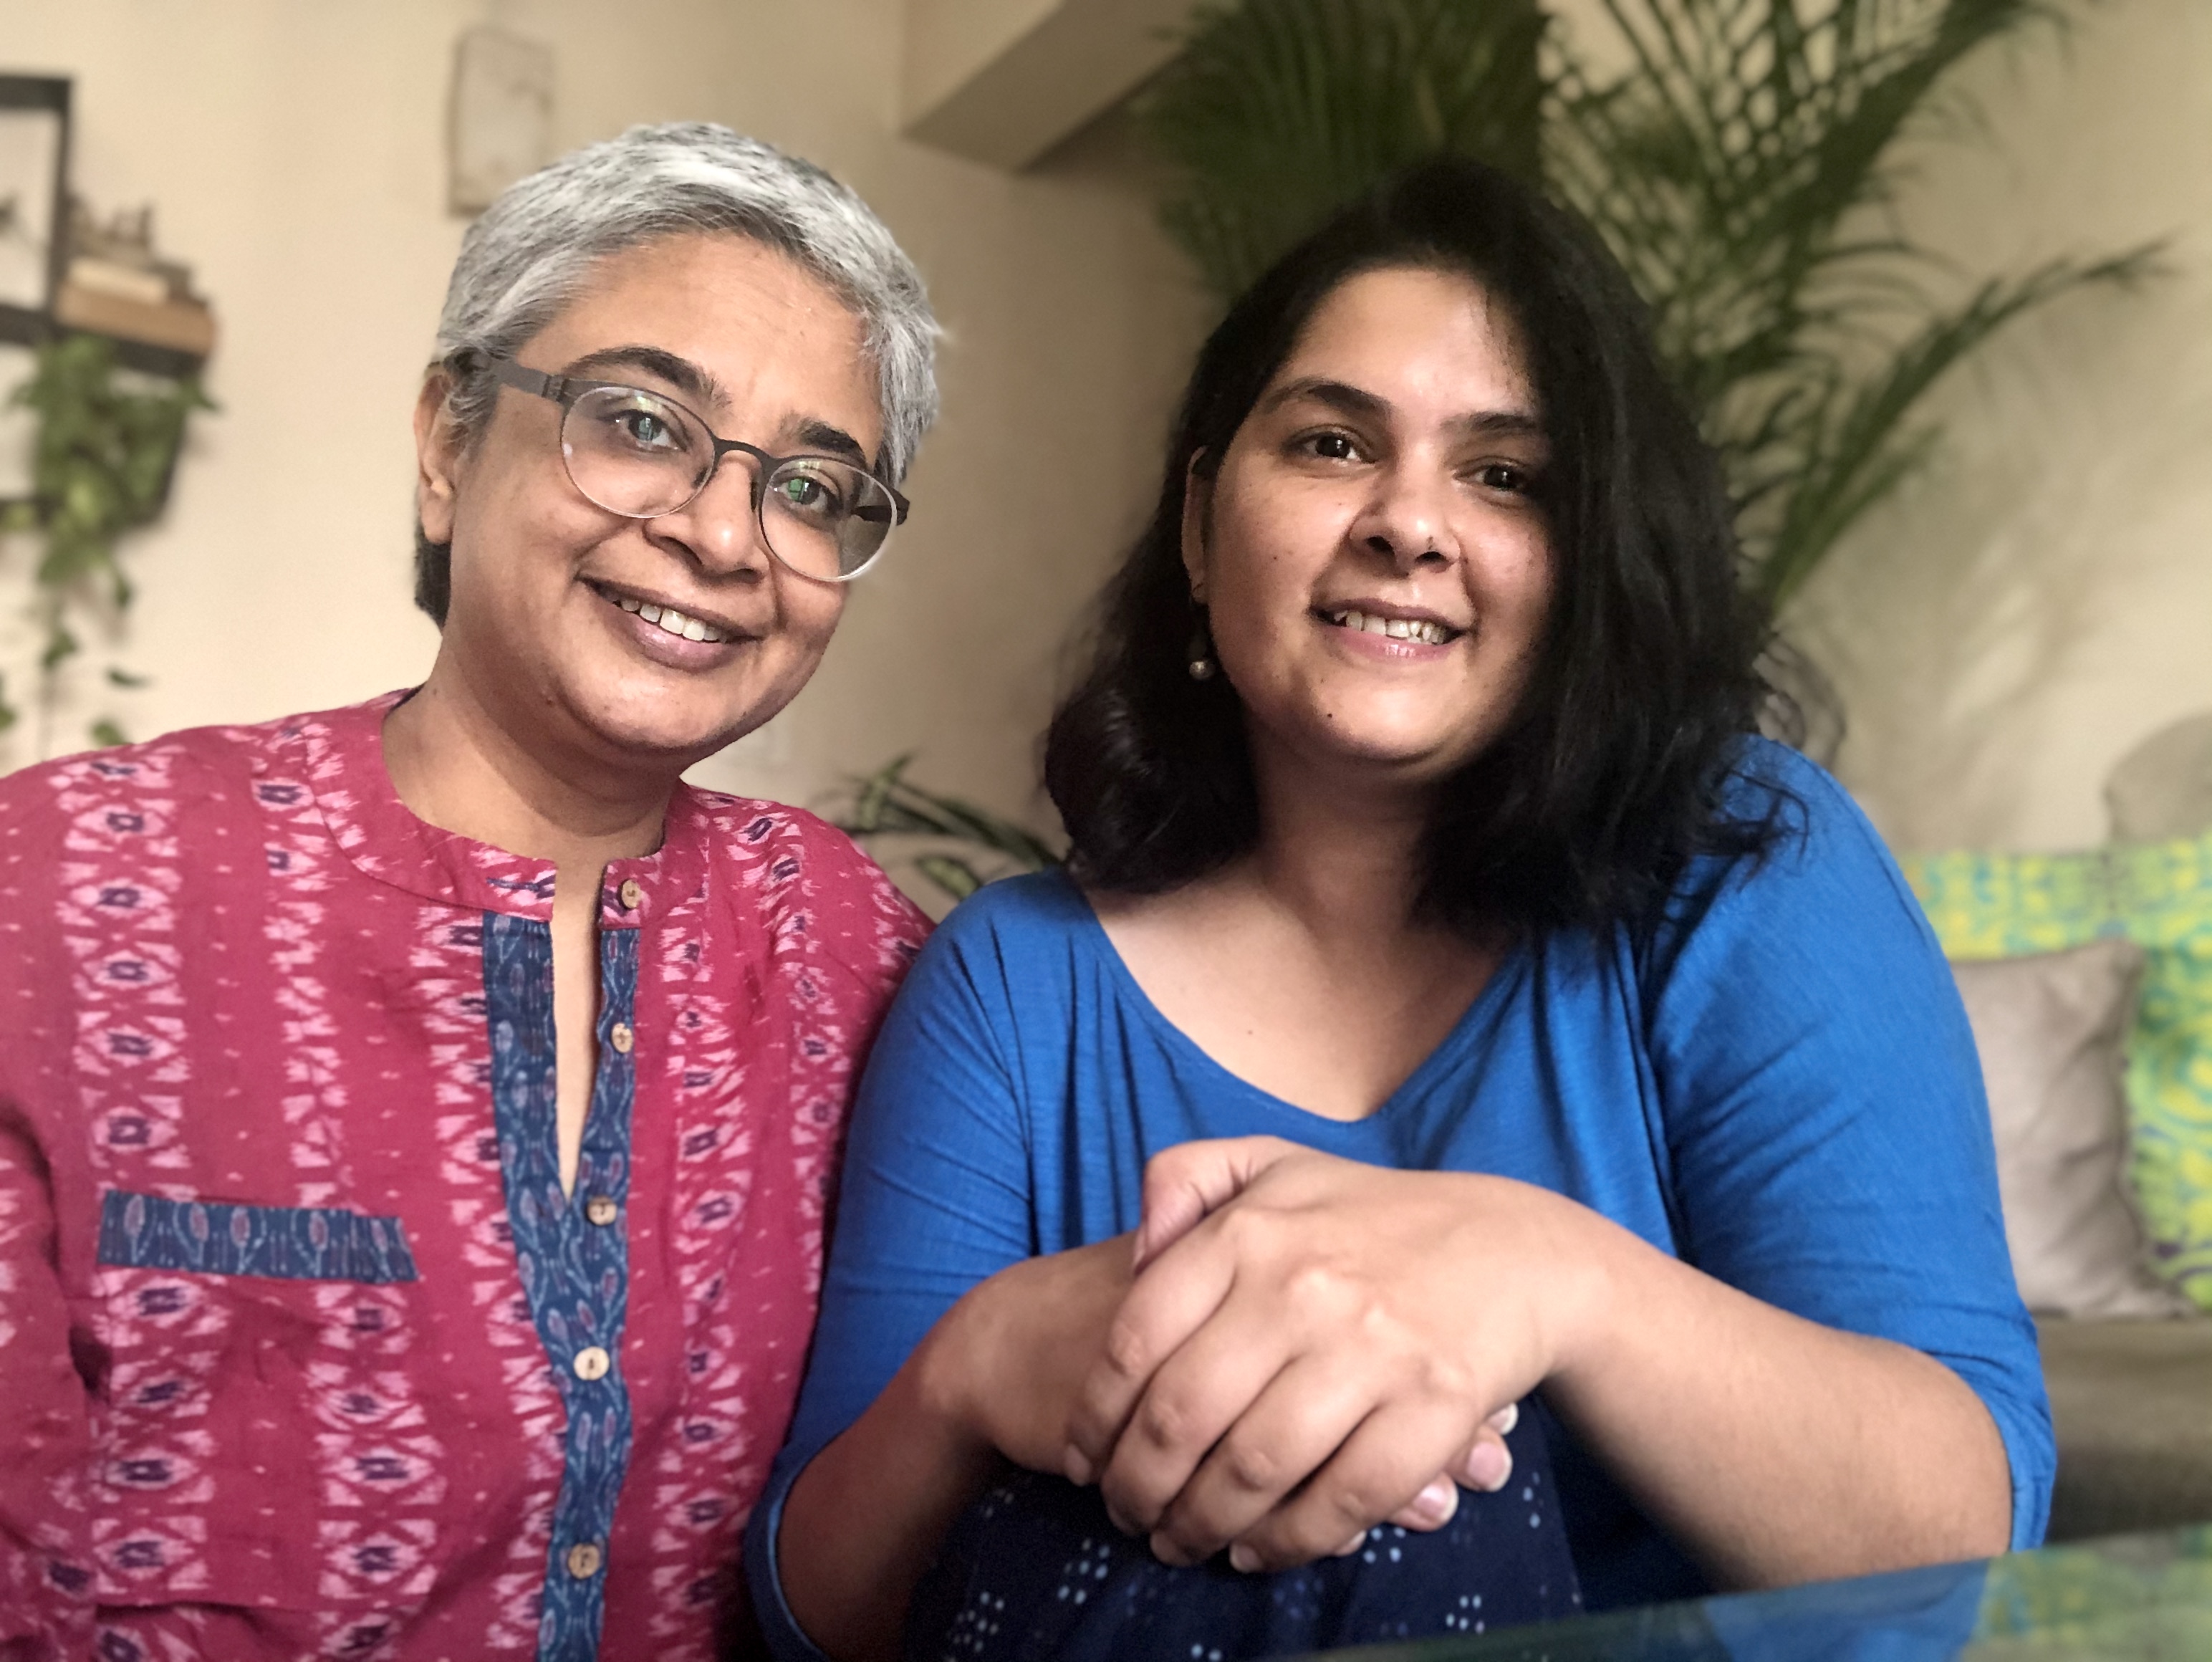 Kavita Arora (left) and Ankita Khanna (right) petitioned a Delhi court in October 2020 for the constitutional right to marry—arguing that without official recognition, they are 